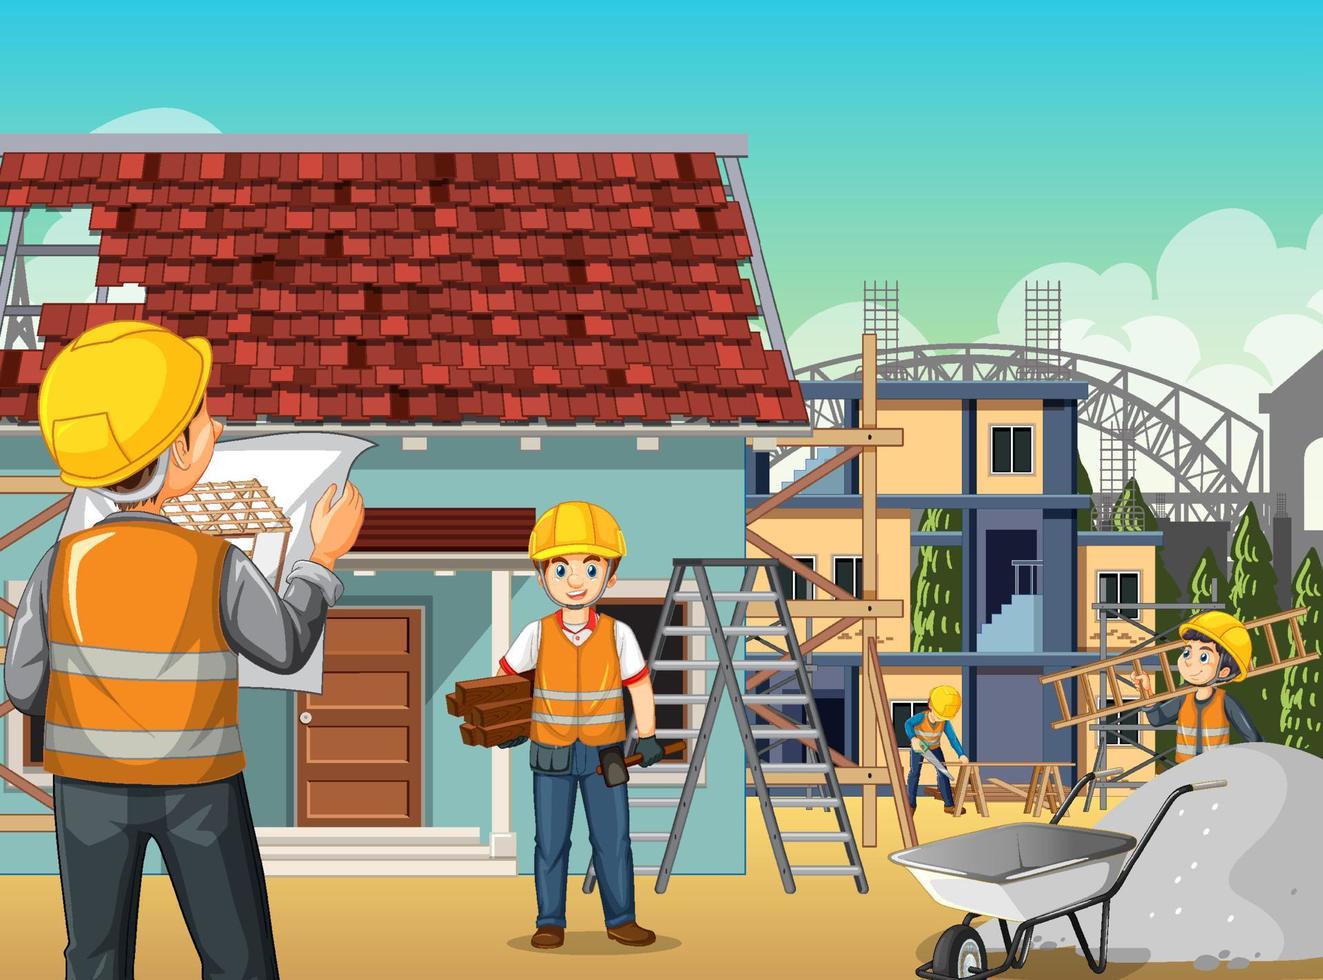 Building construction site with workers vector